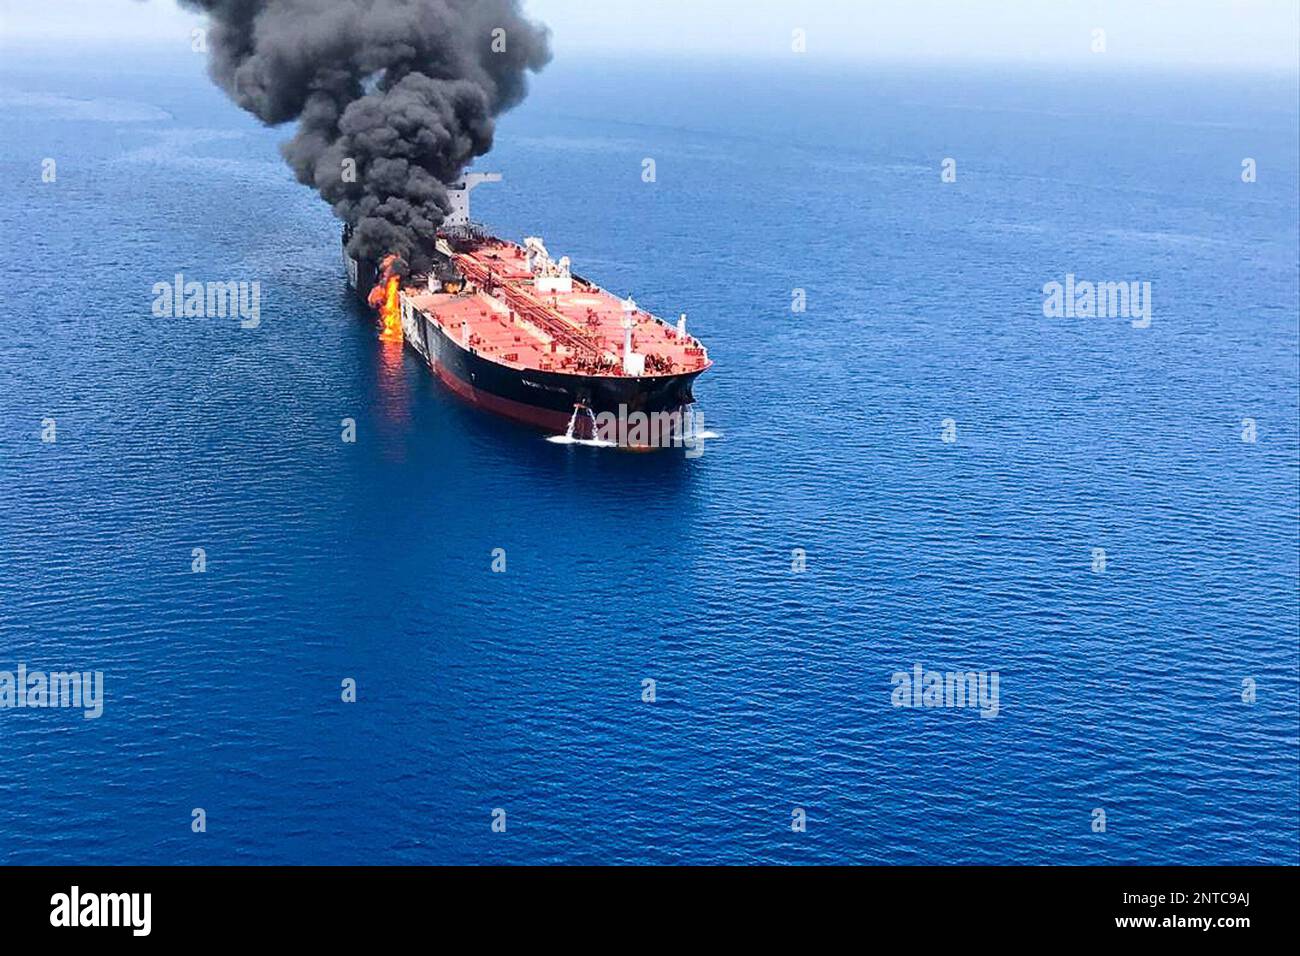 An oil tanker is on fire in the sea of Oman, Thursday, June 13, 2019. Two oil tankers near the strategic Strait of Hormuz were reportedly attacked on Thursday, an assault that left one ablaze and adrift as sailors were evacuated from both vessels and the U.S. Navy rushed to assist amid heightened tensions between Washington and Tehran. (AP Photo/ISNA) Stock Photo